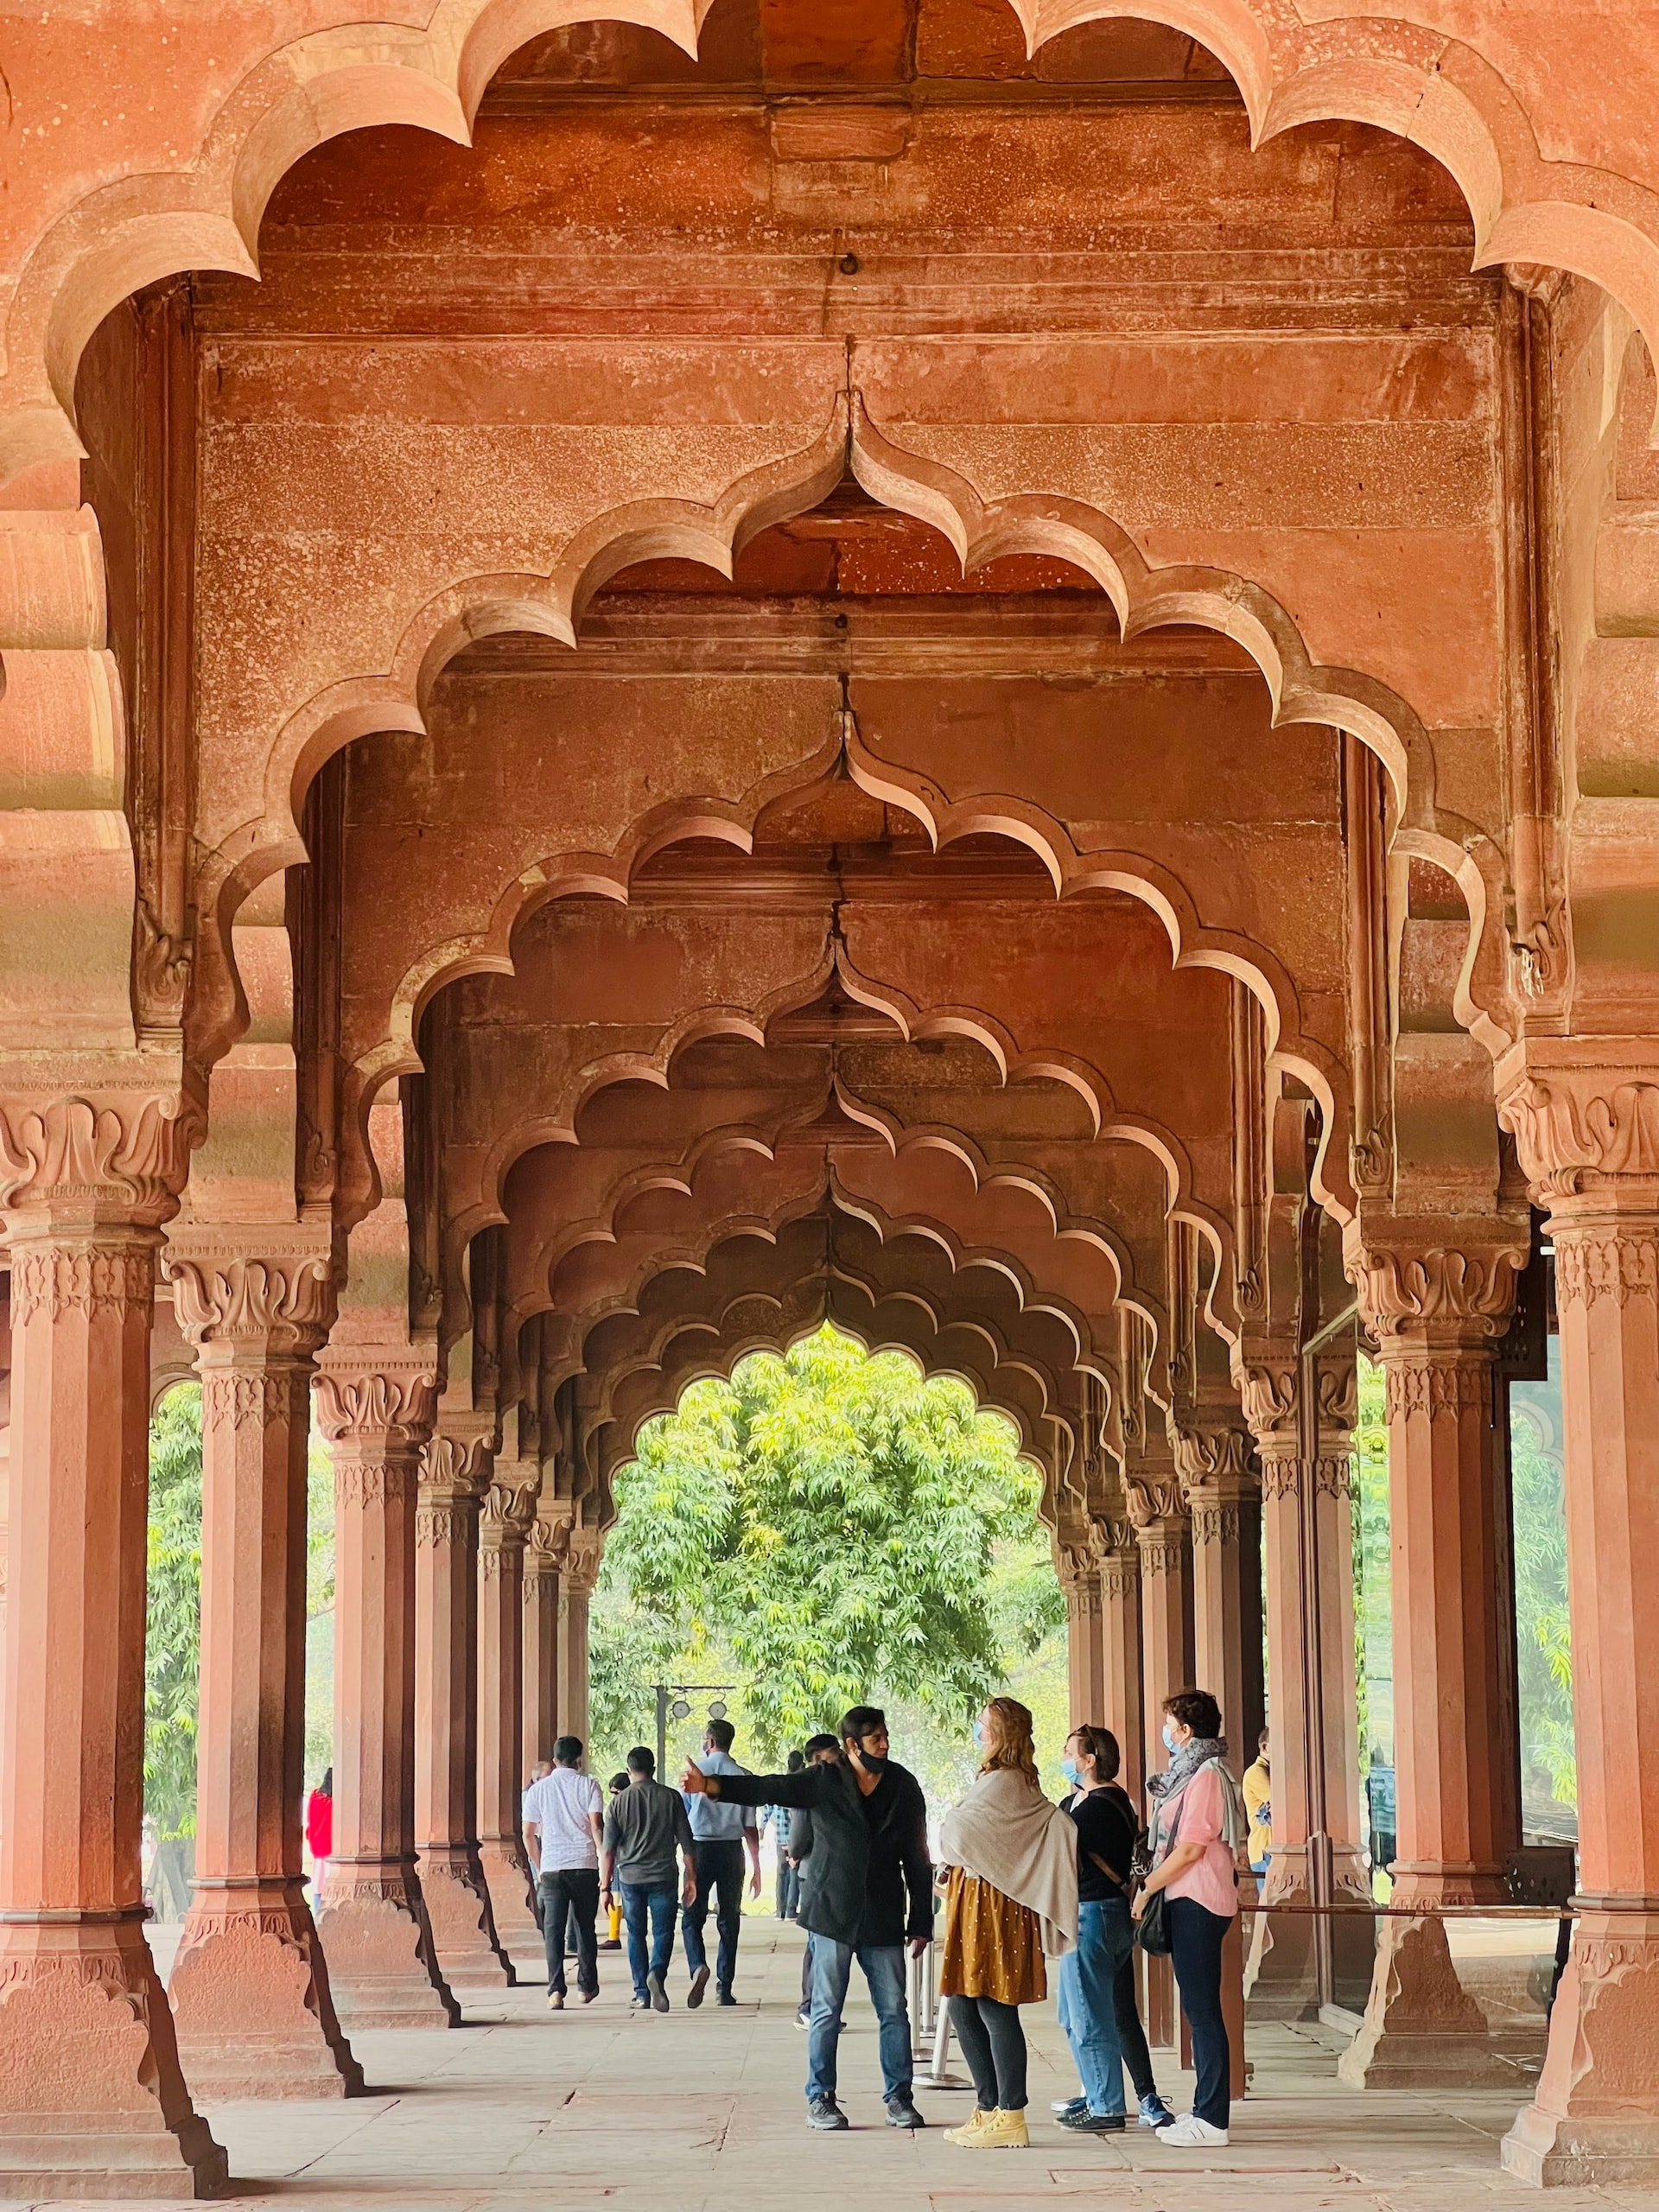 Inside the Red Fort, an important and historical place in Delhi (photo: Ayan Ahmad)